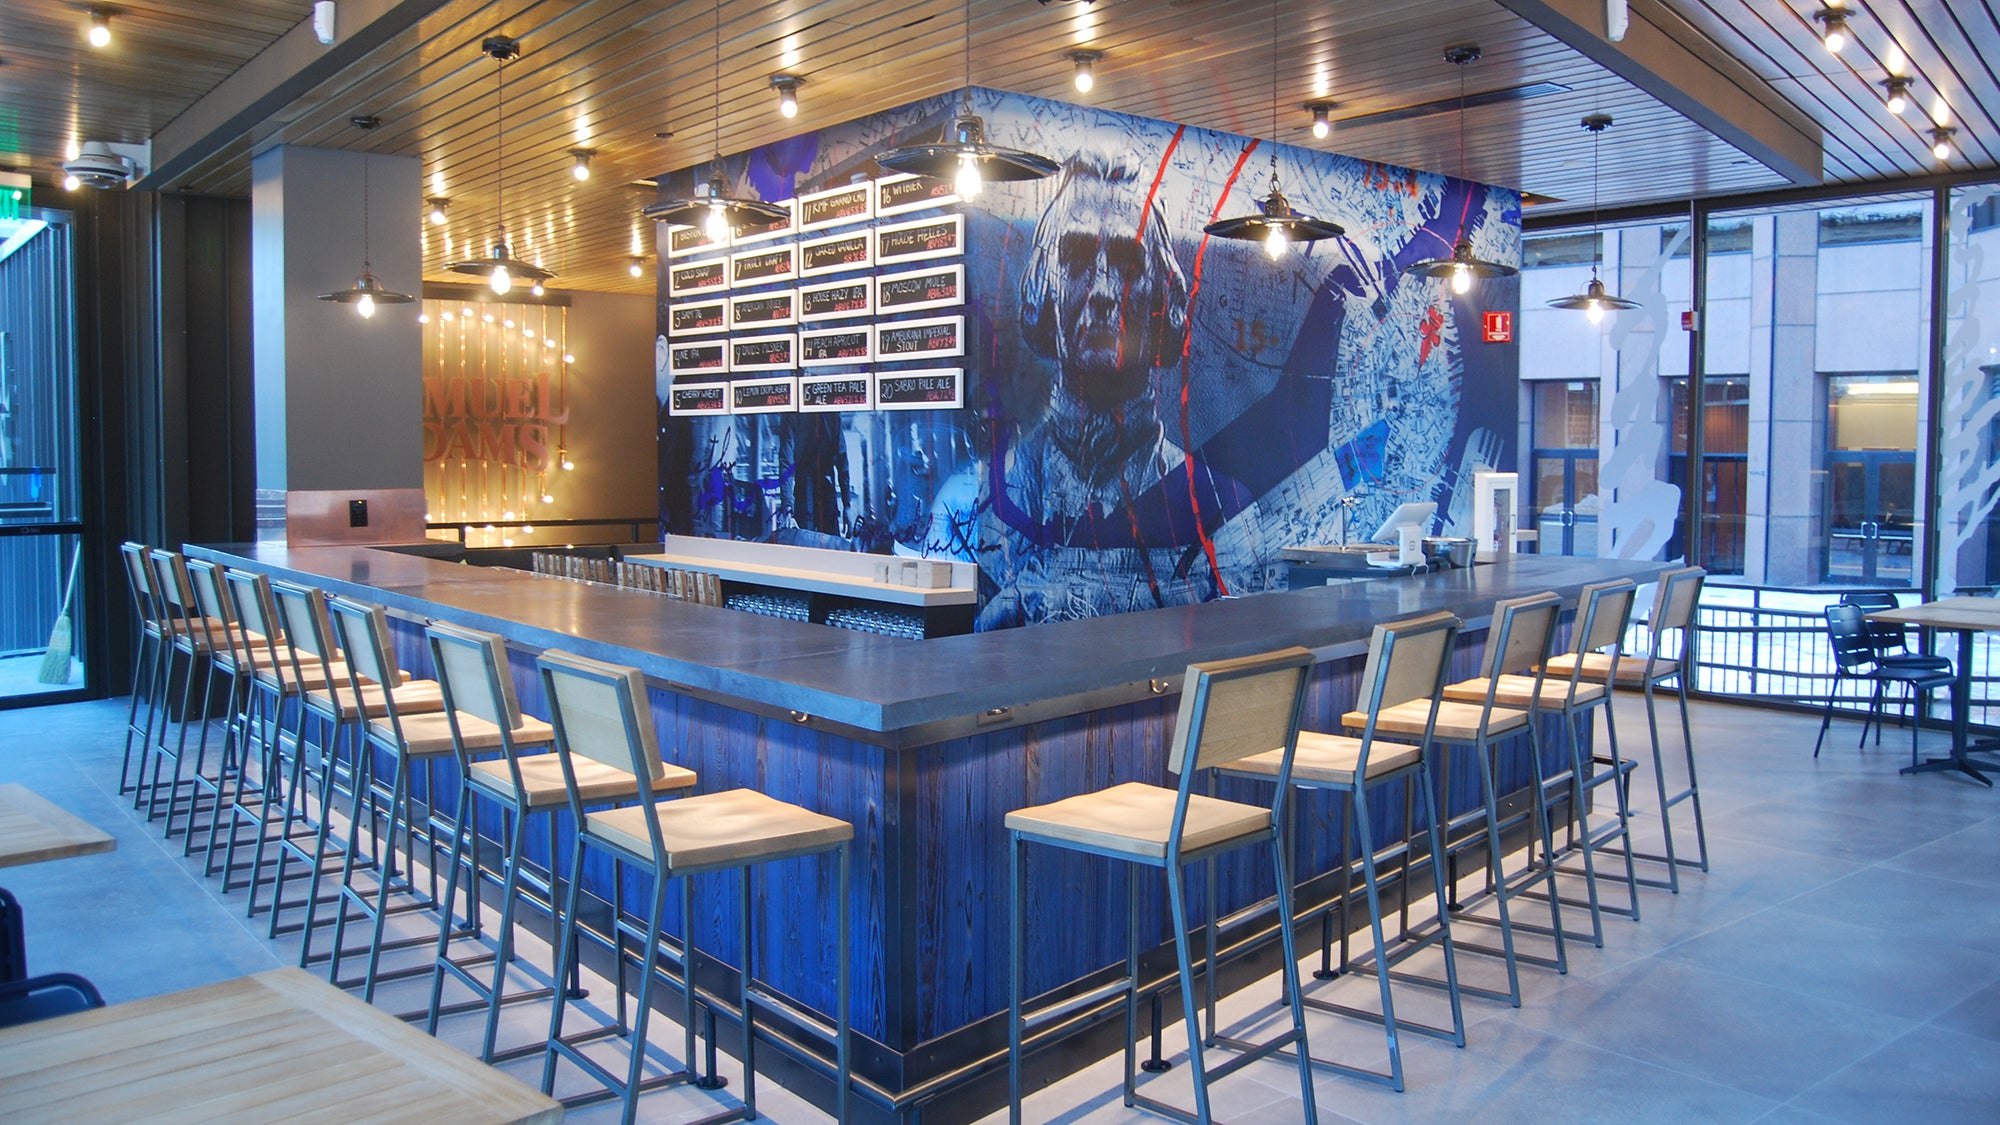 Here's your first look at the new Samuel Adams Boston Tap Room at